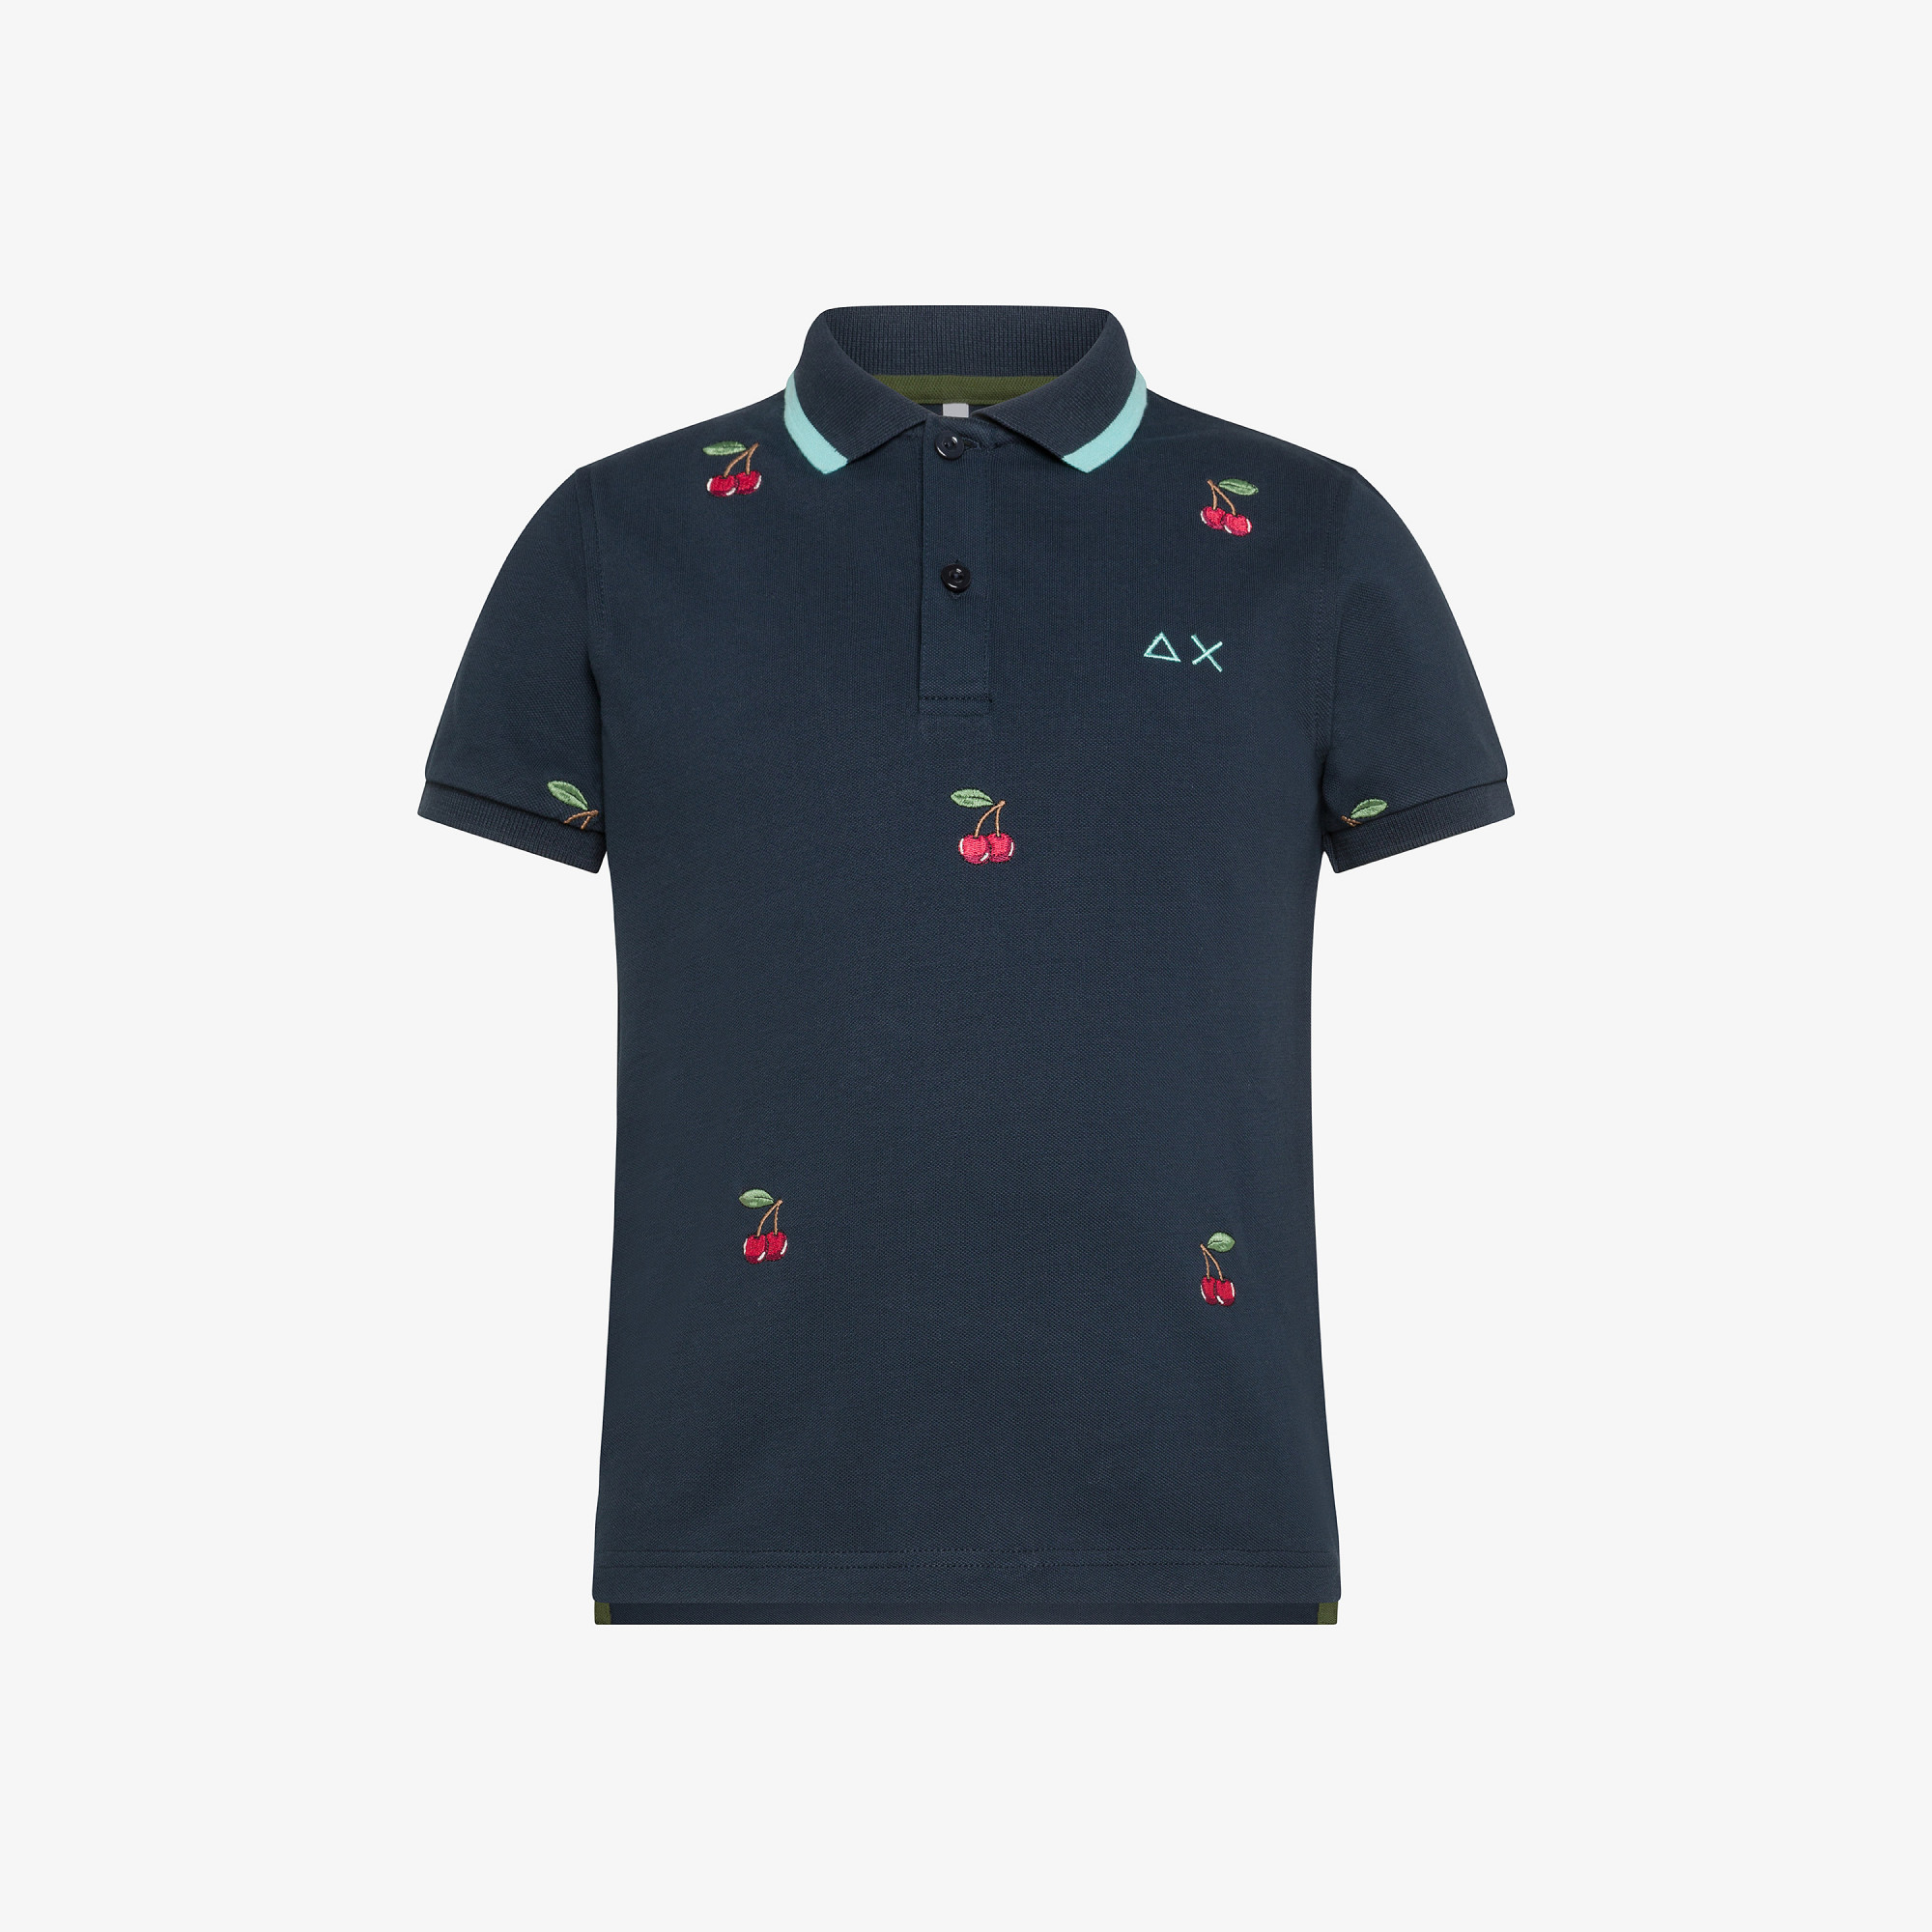 BOY'S POLO FULL EMBROIDERY S/S NAVY BLUE